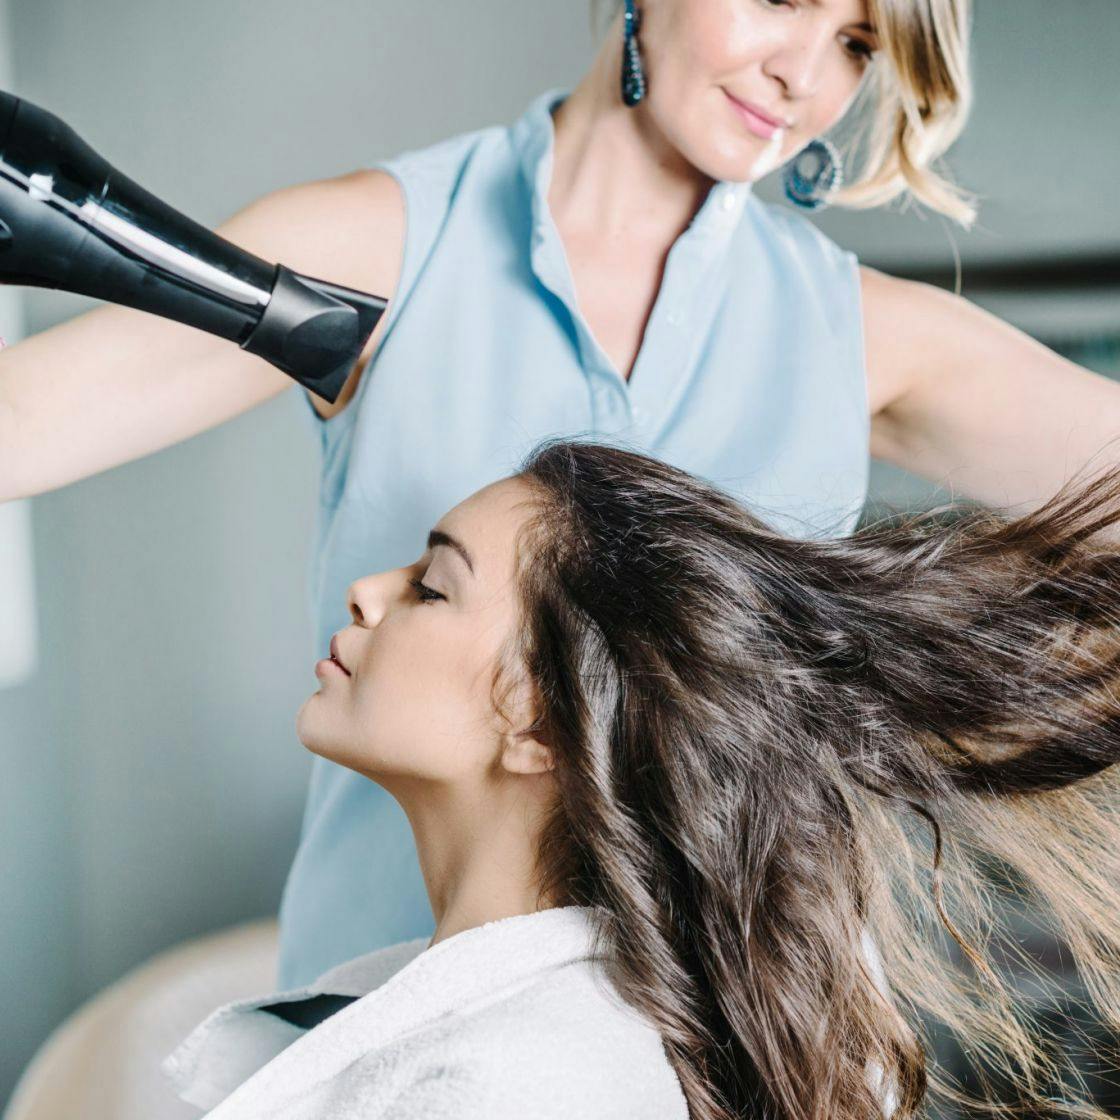 How to make your blowdry last longer - Steps for at-home blowdry